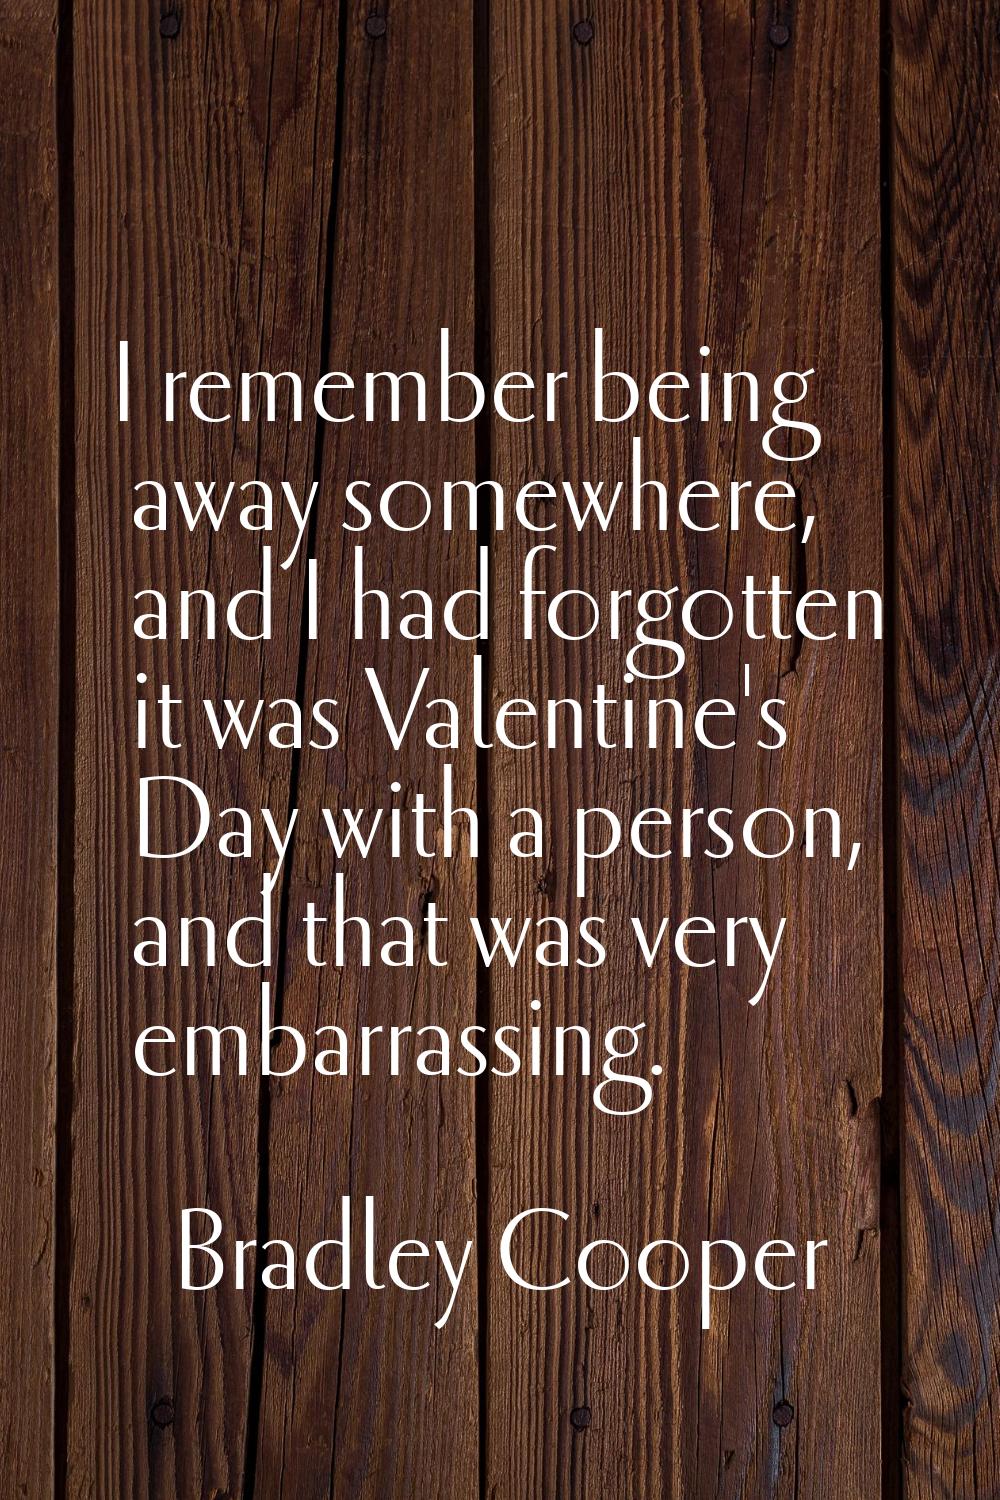 I remember being away somewhere, and I had forgotten it was Valentine's Day with a person, and that